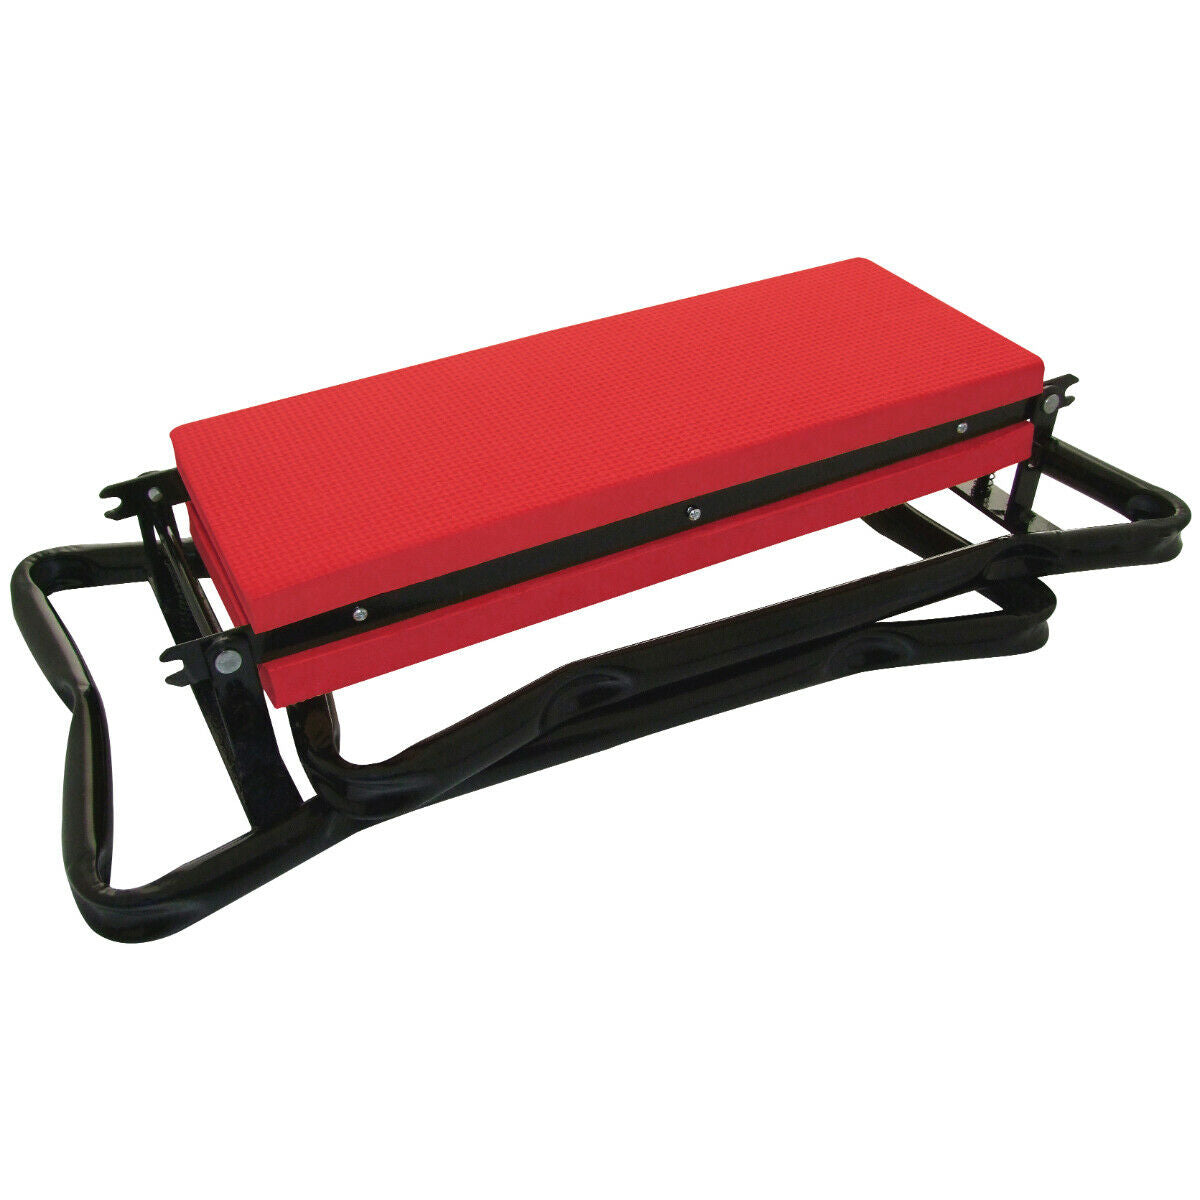 TABOR TOOLS TR2A Garden Kneeler and Seat Bench with Tool Bag Pouch and Foam Pad Cushion, Workseat with Kneeling Bench Option, Foldable Stool